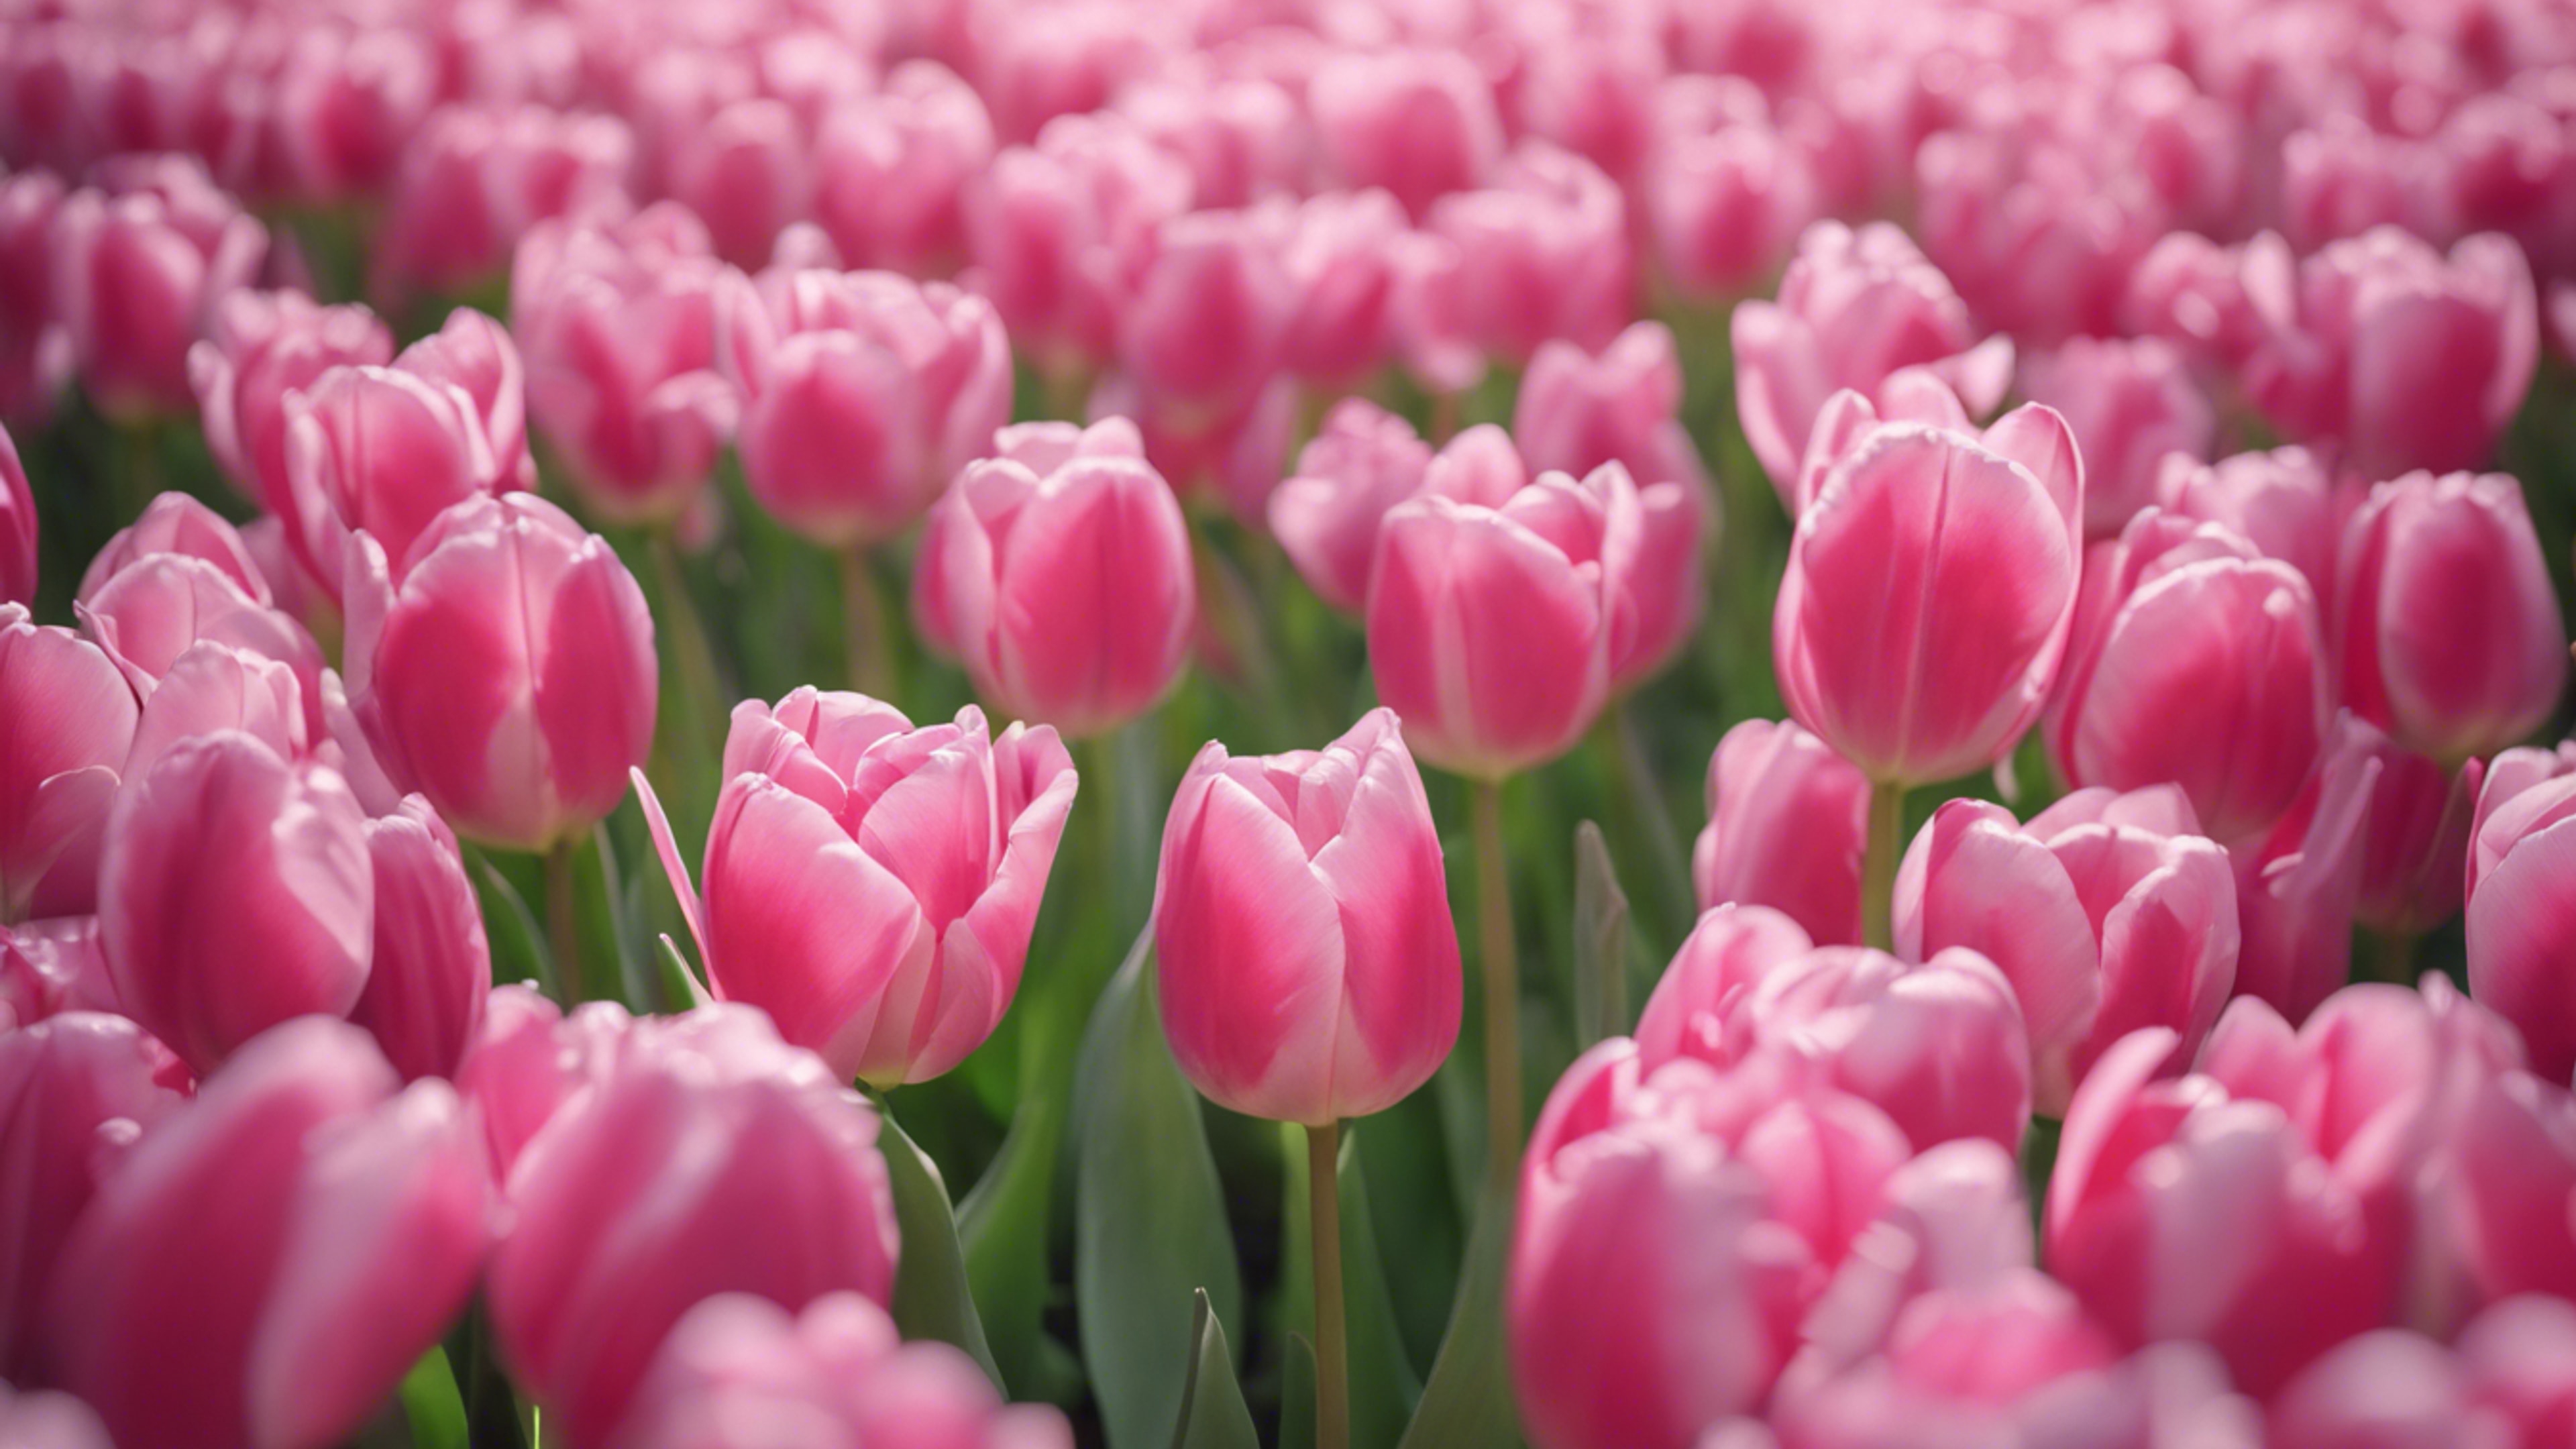 A group of pink tulips forming a perfect heart shape.壁紙[03142173a34943bc92d4]